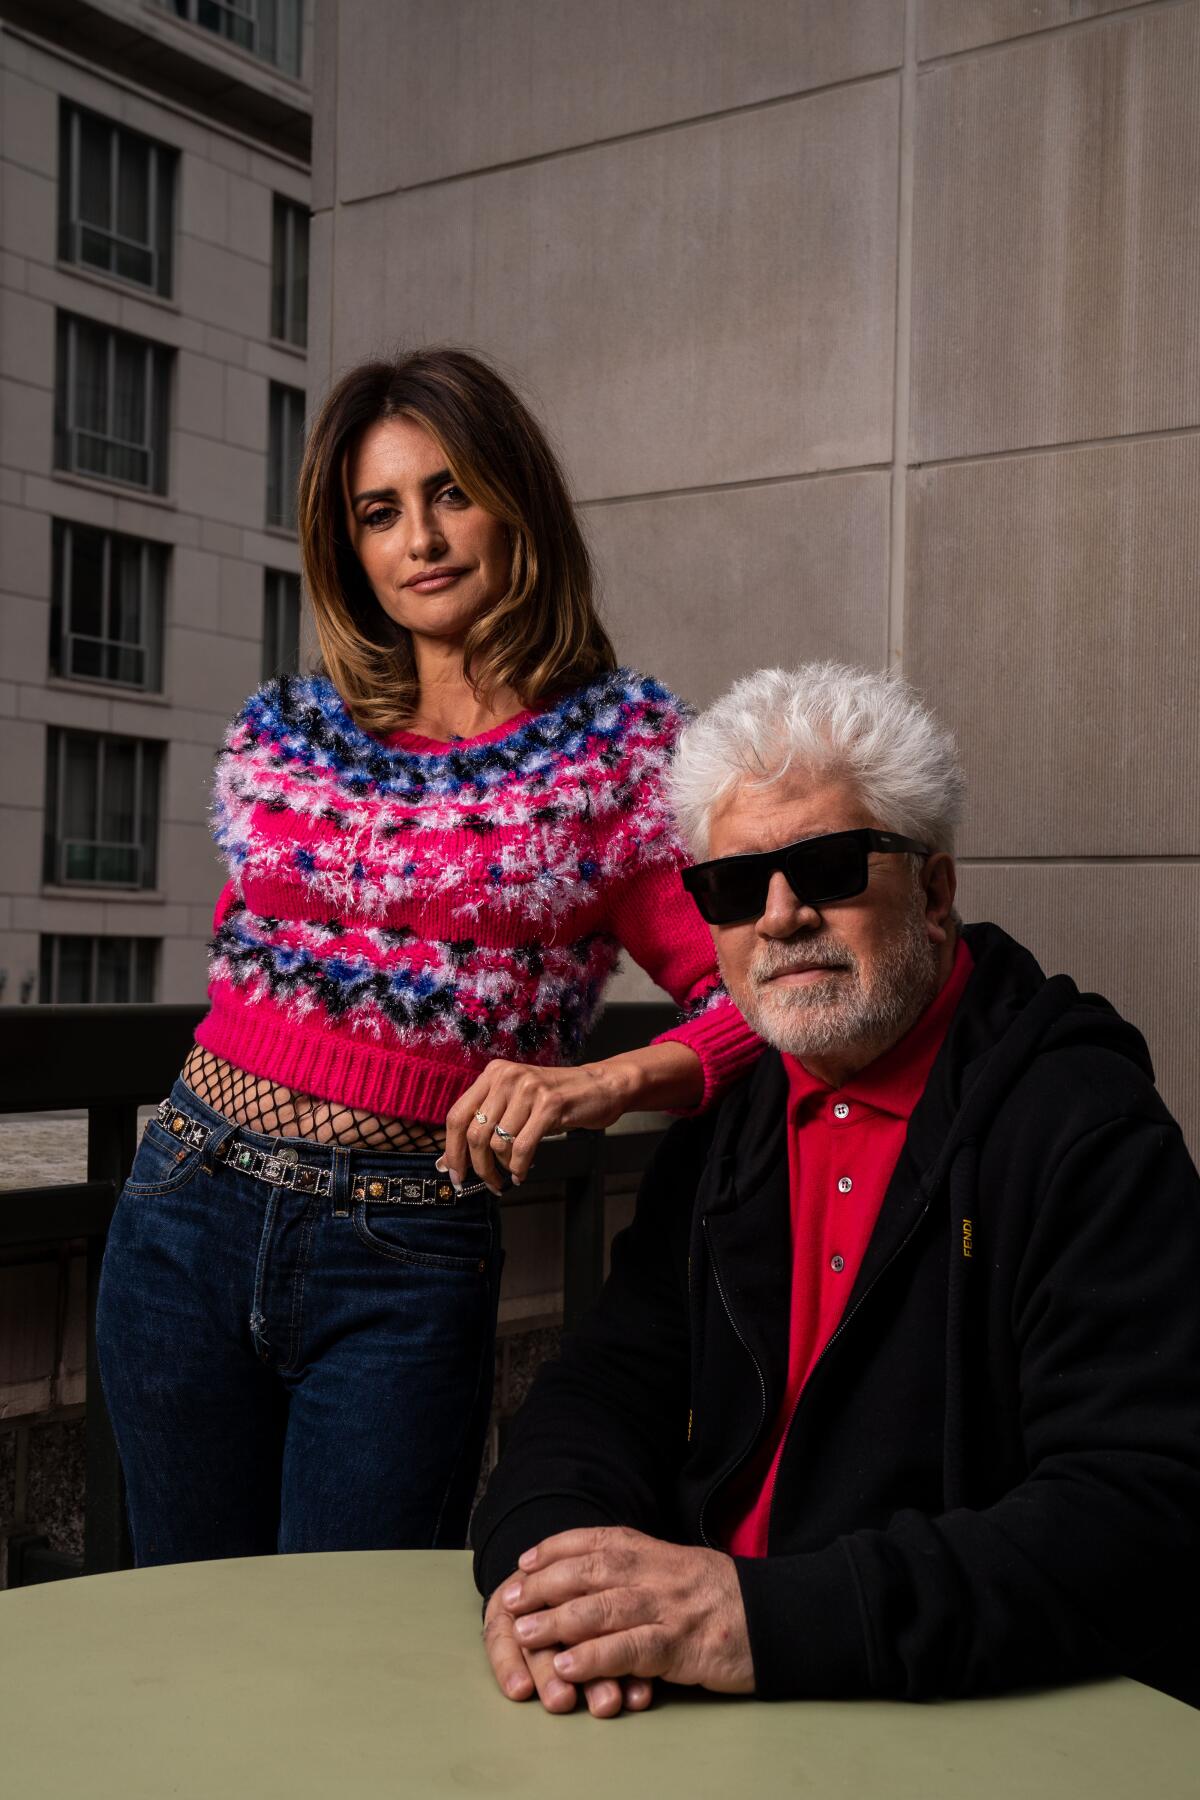 Penelope Cruz stands with her arm resting on the seated director Pedro Almodovar's shoulder.